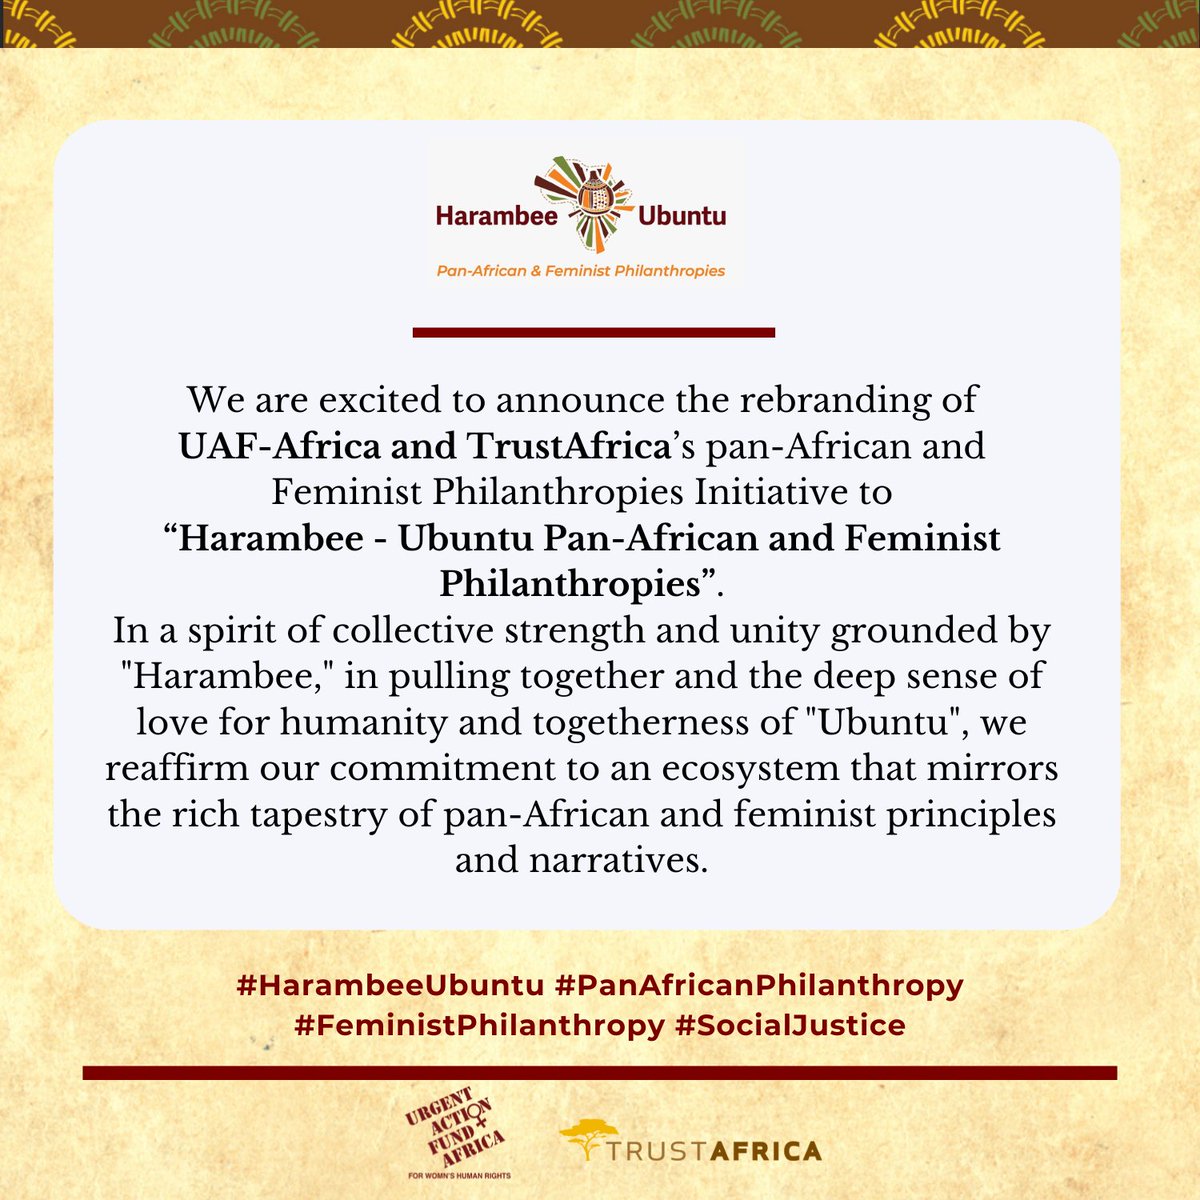 📢 𝐈𝐧𝐜𝐫𝐞𝐝𝐢𝐛𝐥𝐞 𝐮𝐩𝐝𝐚𝐭𝐞!! Introducing Harambee-Ubuntu: Focused on connecting and empowering social movements, activists, and communities through transformative partnerships and constituency-building. Together, we drive justice and equity. @TrustAfrica & @UAFAfrica